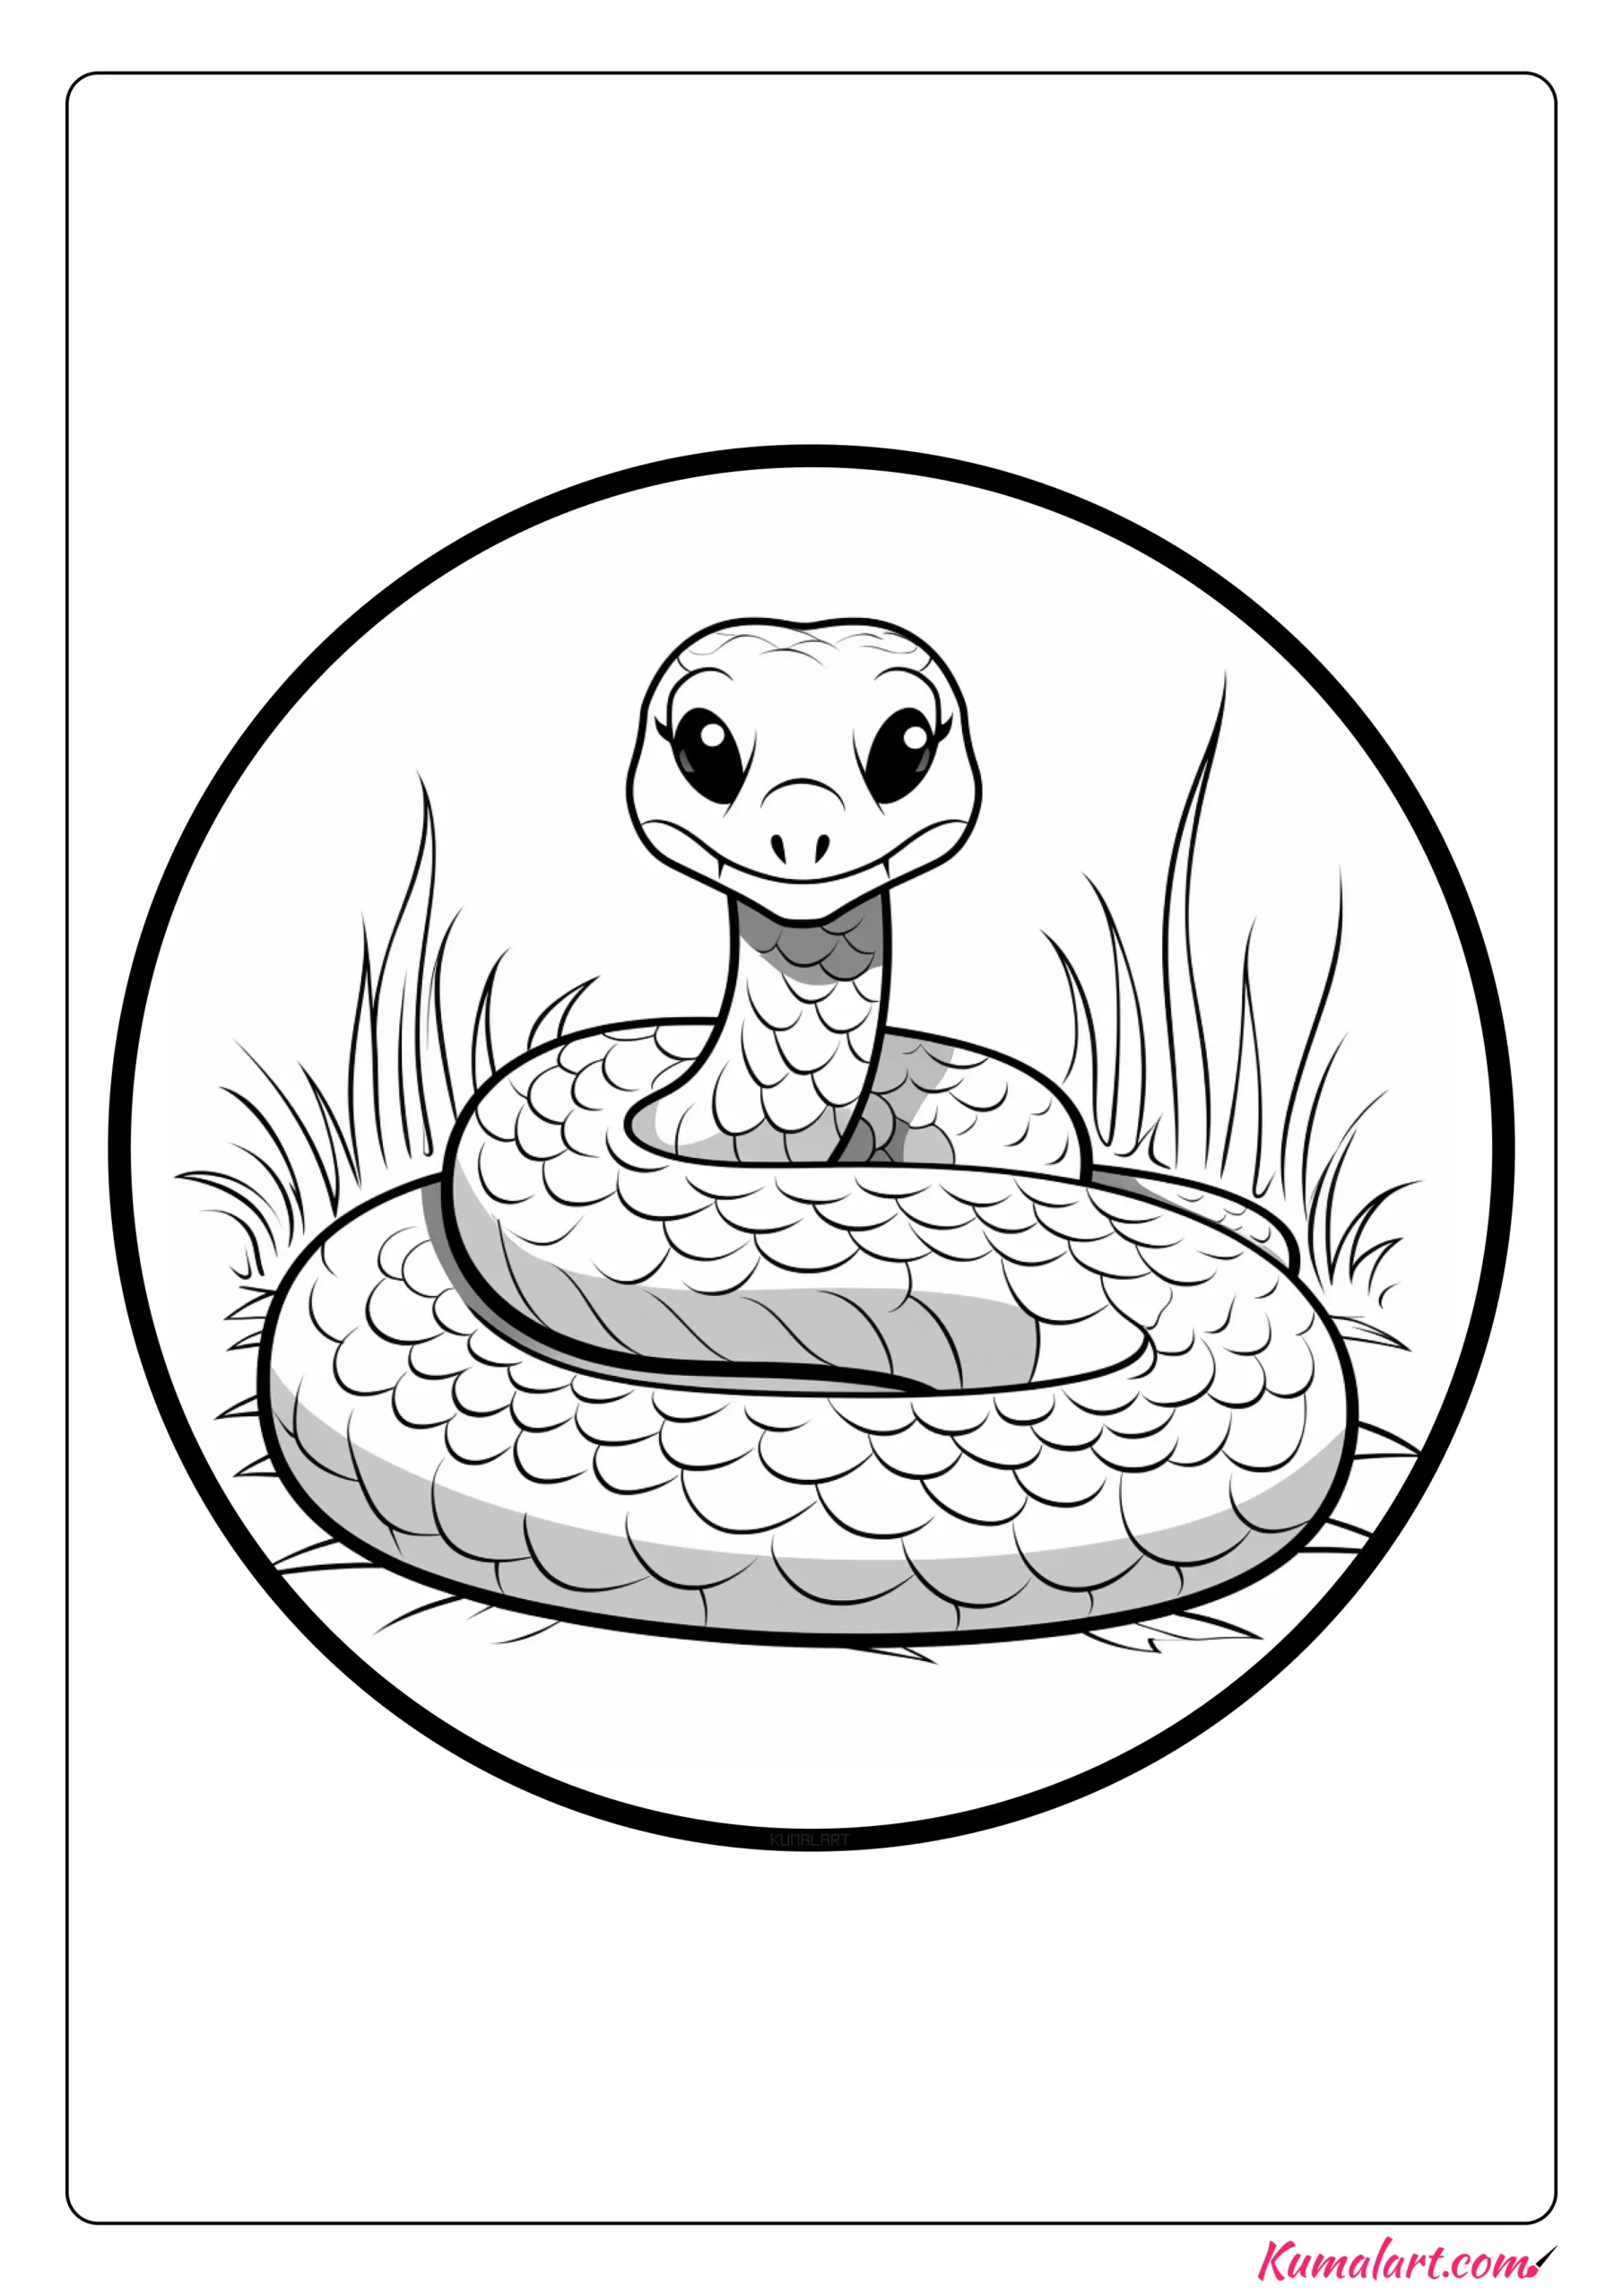 Crotalus Cerberus Rattle Snake Coloring Page